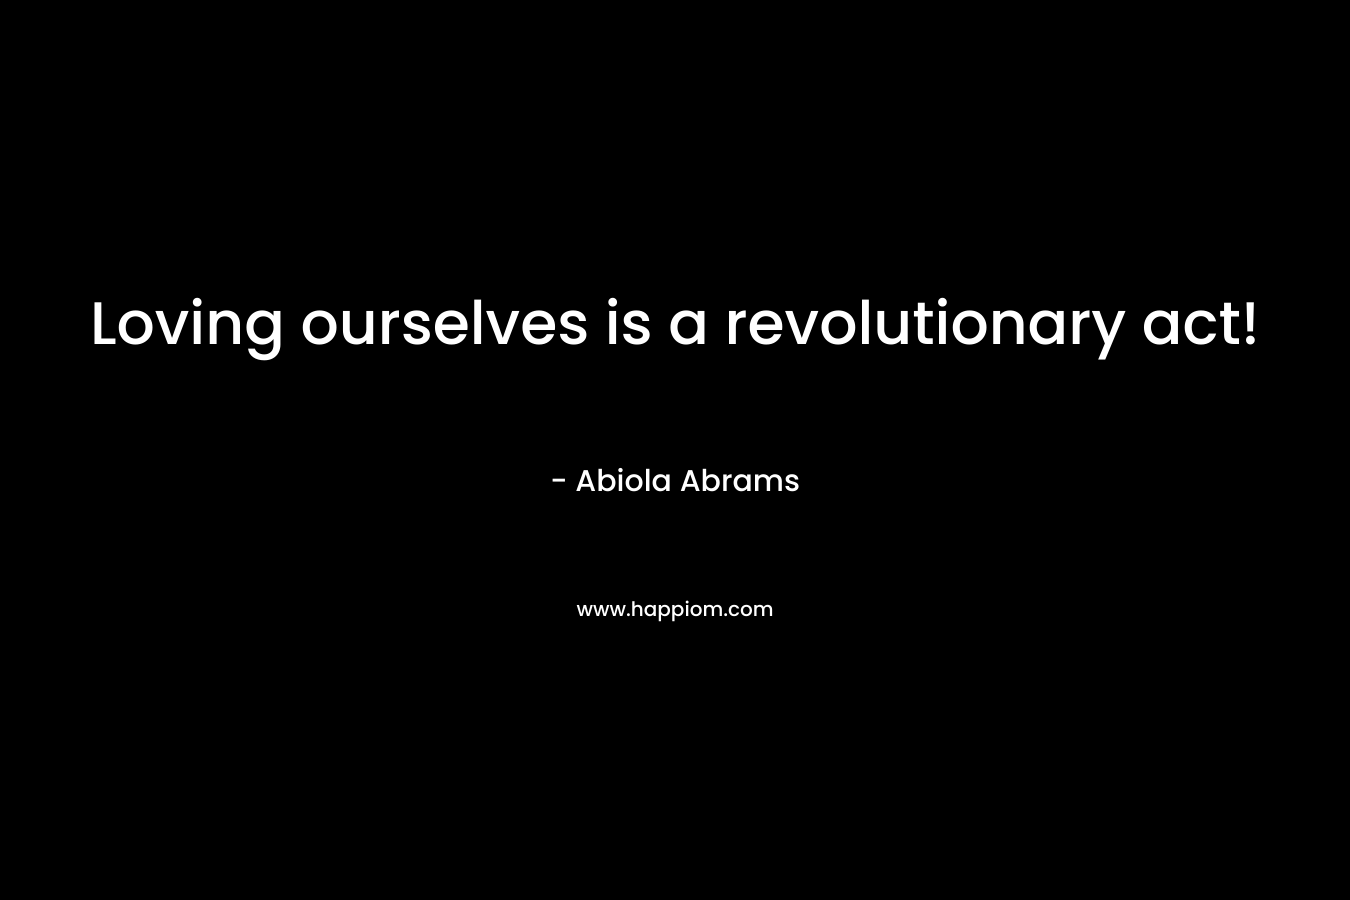 Loving ourselves is a revolutionary act!